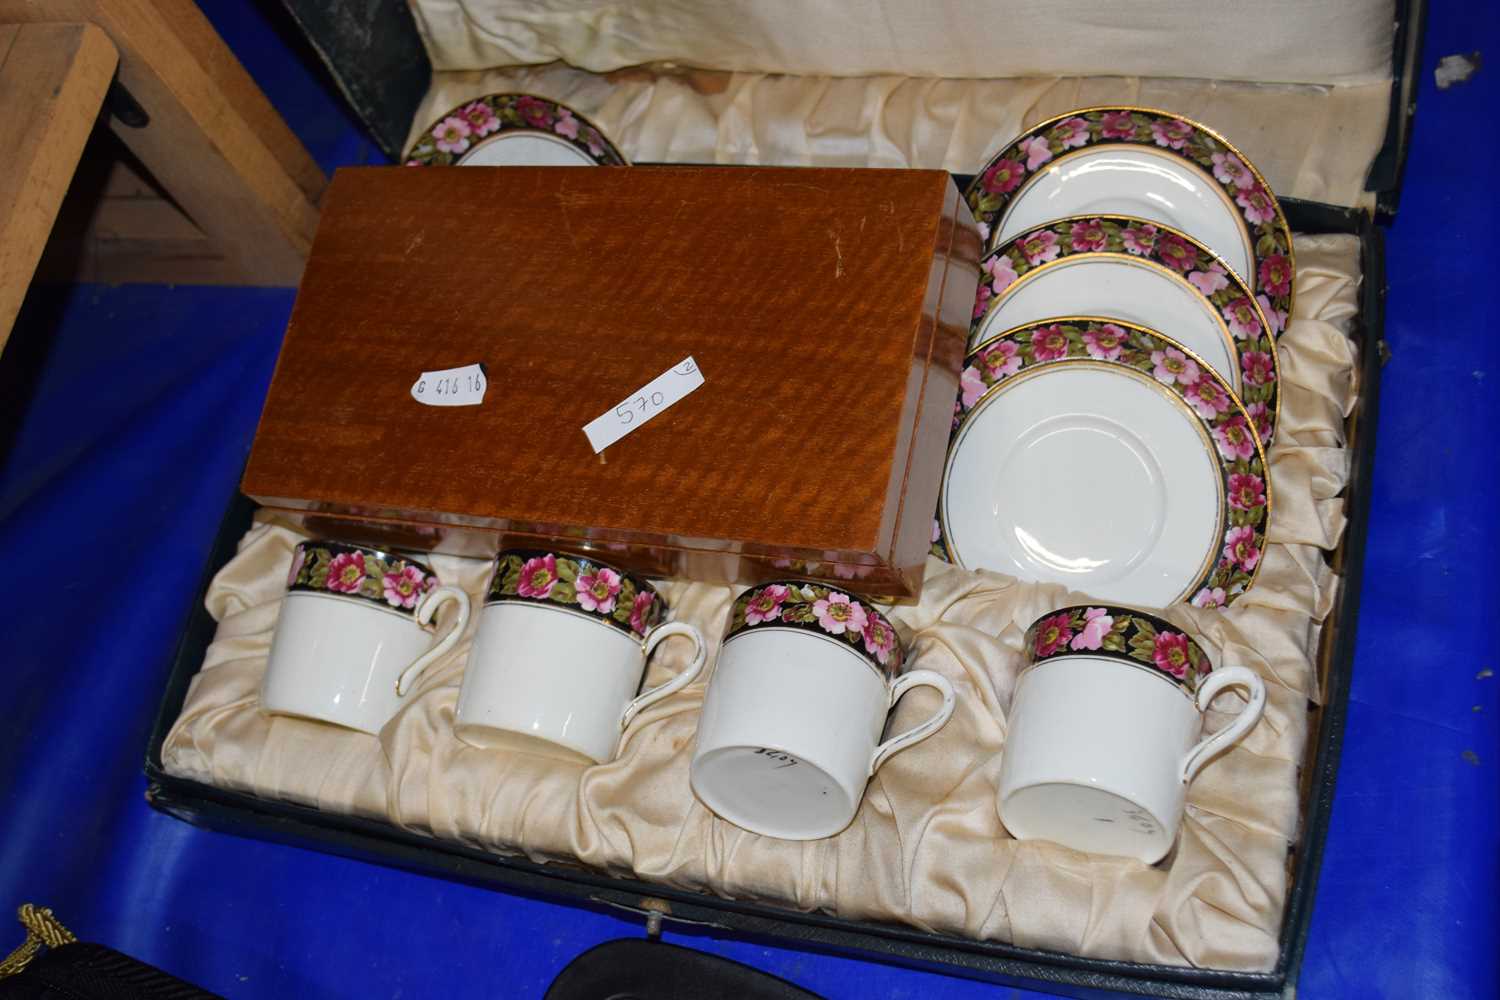 An Allertons boxed coffee set together with a wooden cigarette box